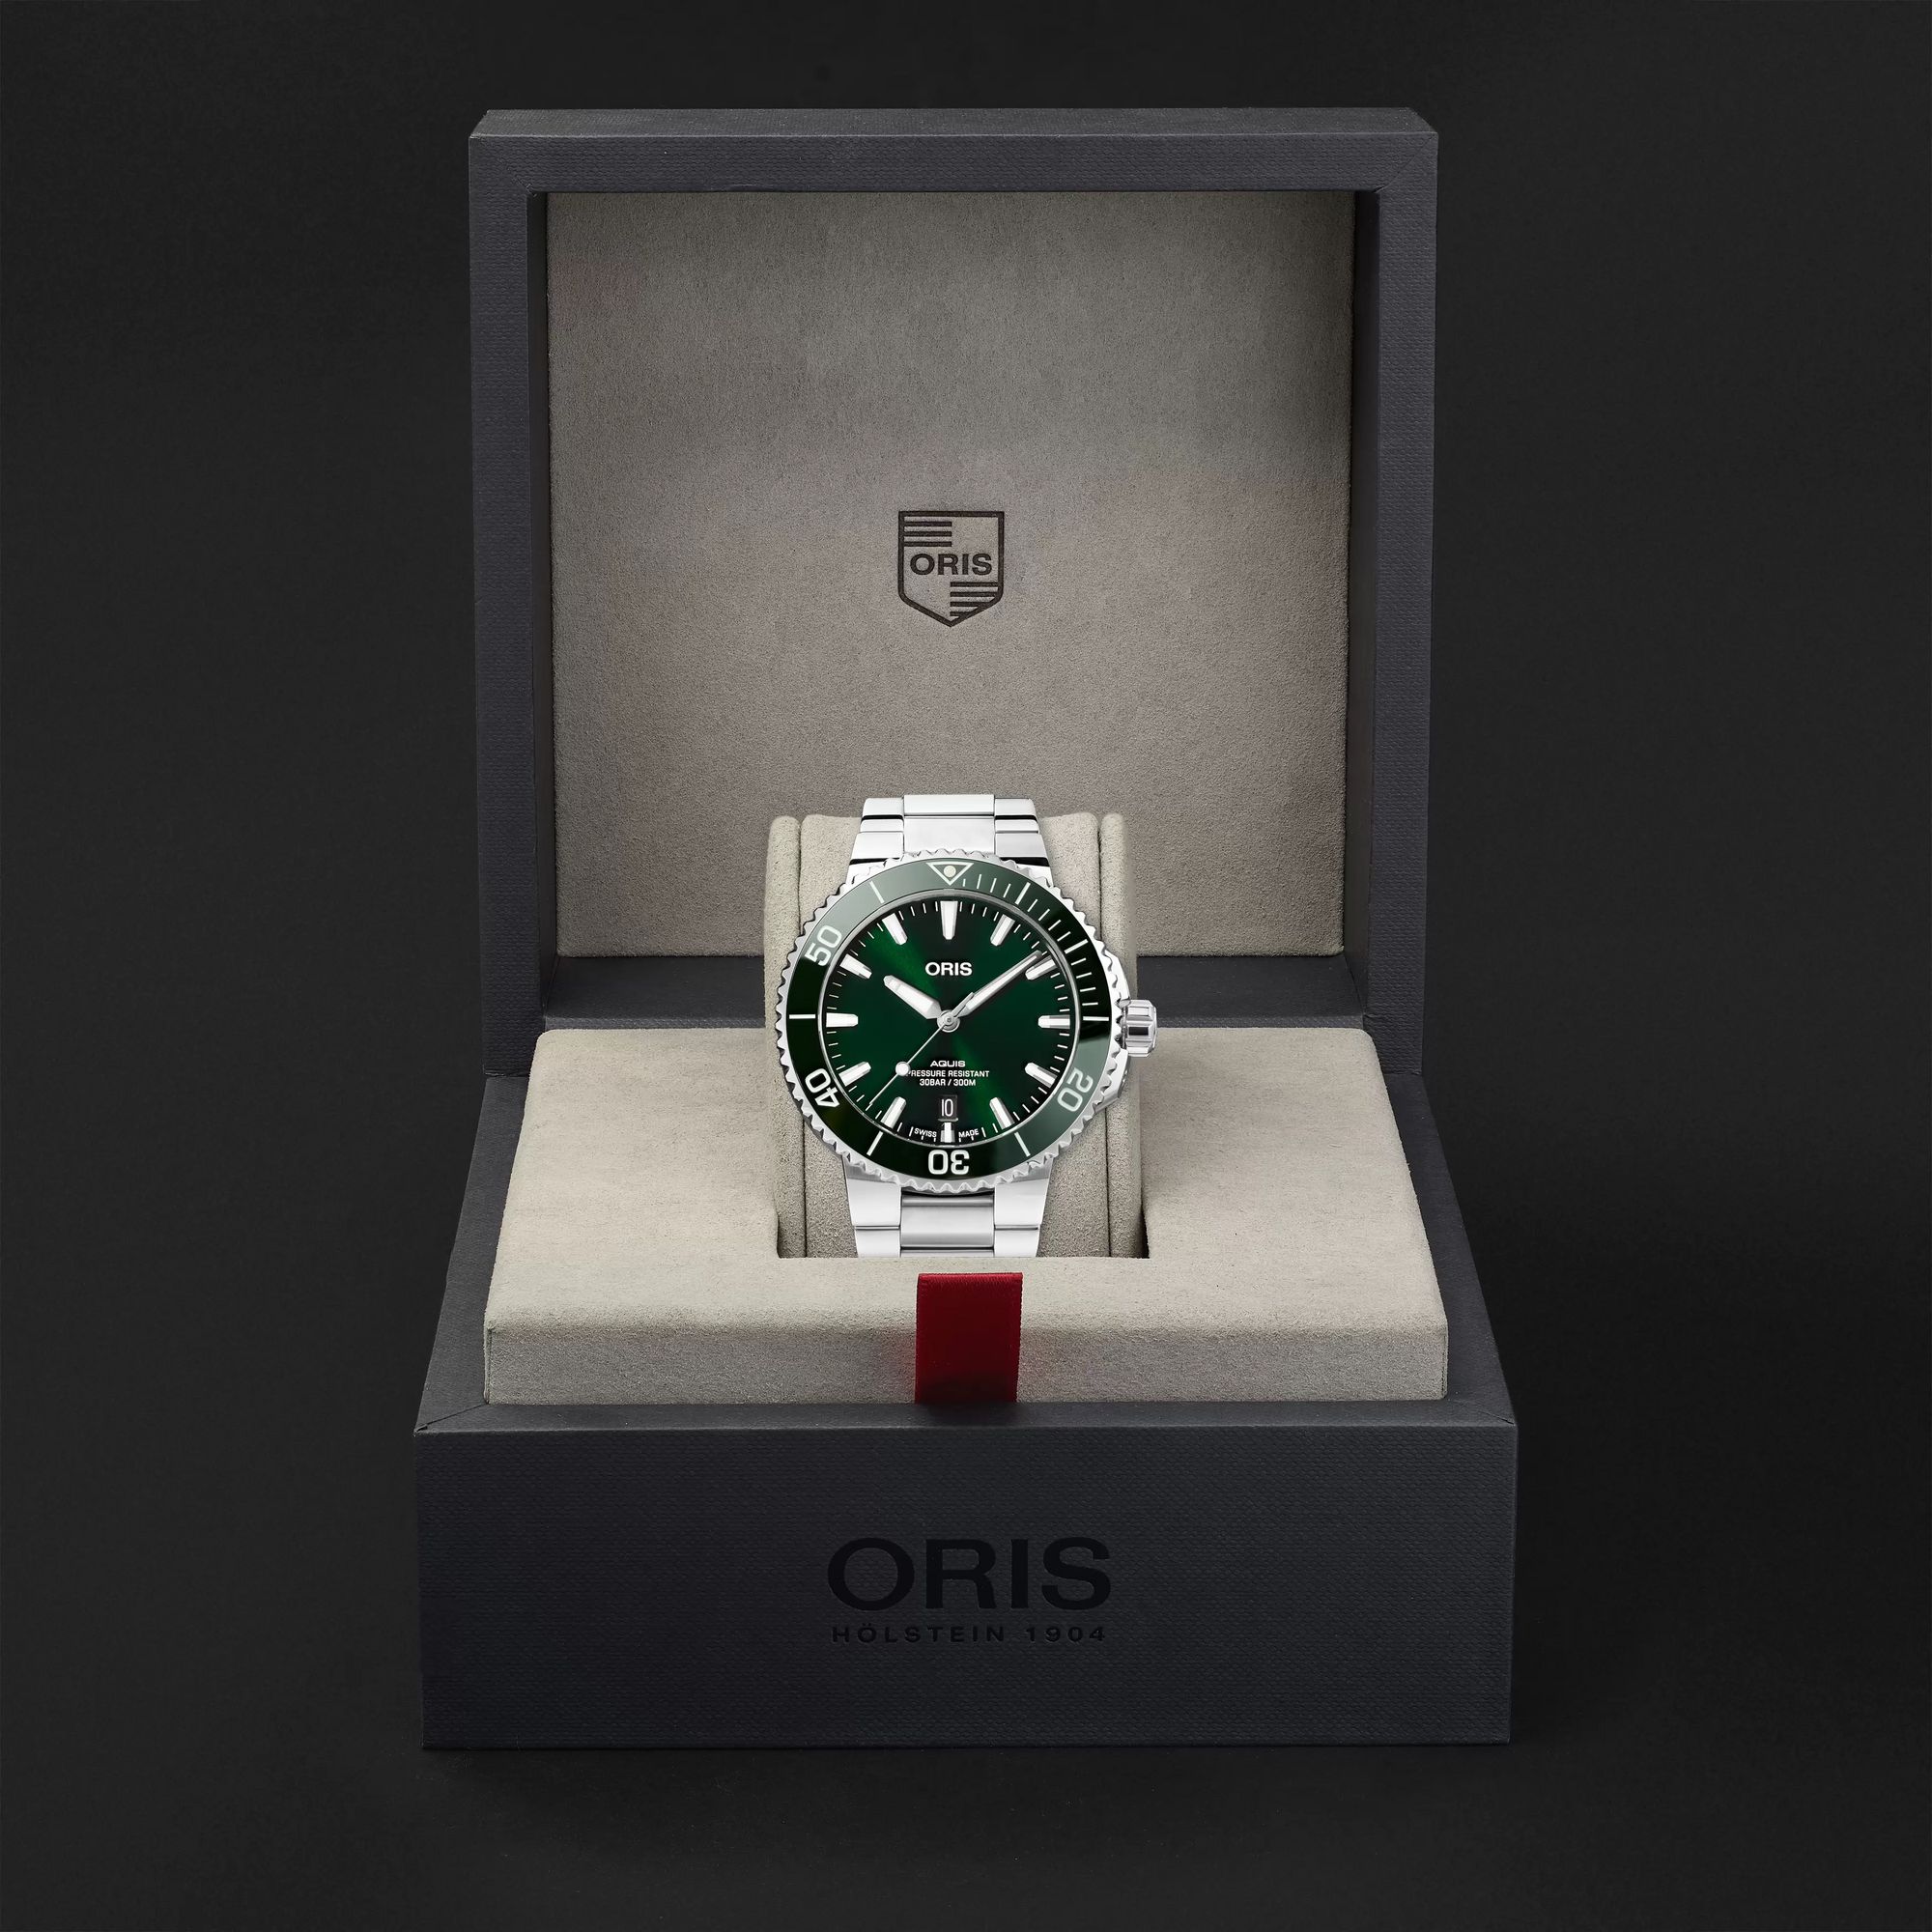 ORIS Aquis Date Automatic 41.5mm Stainless Steel Watch, Ref. No. 01 733 7766 4157-07 8 22 05PEB